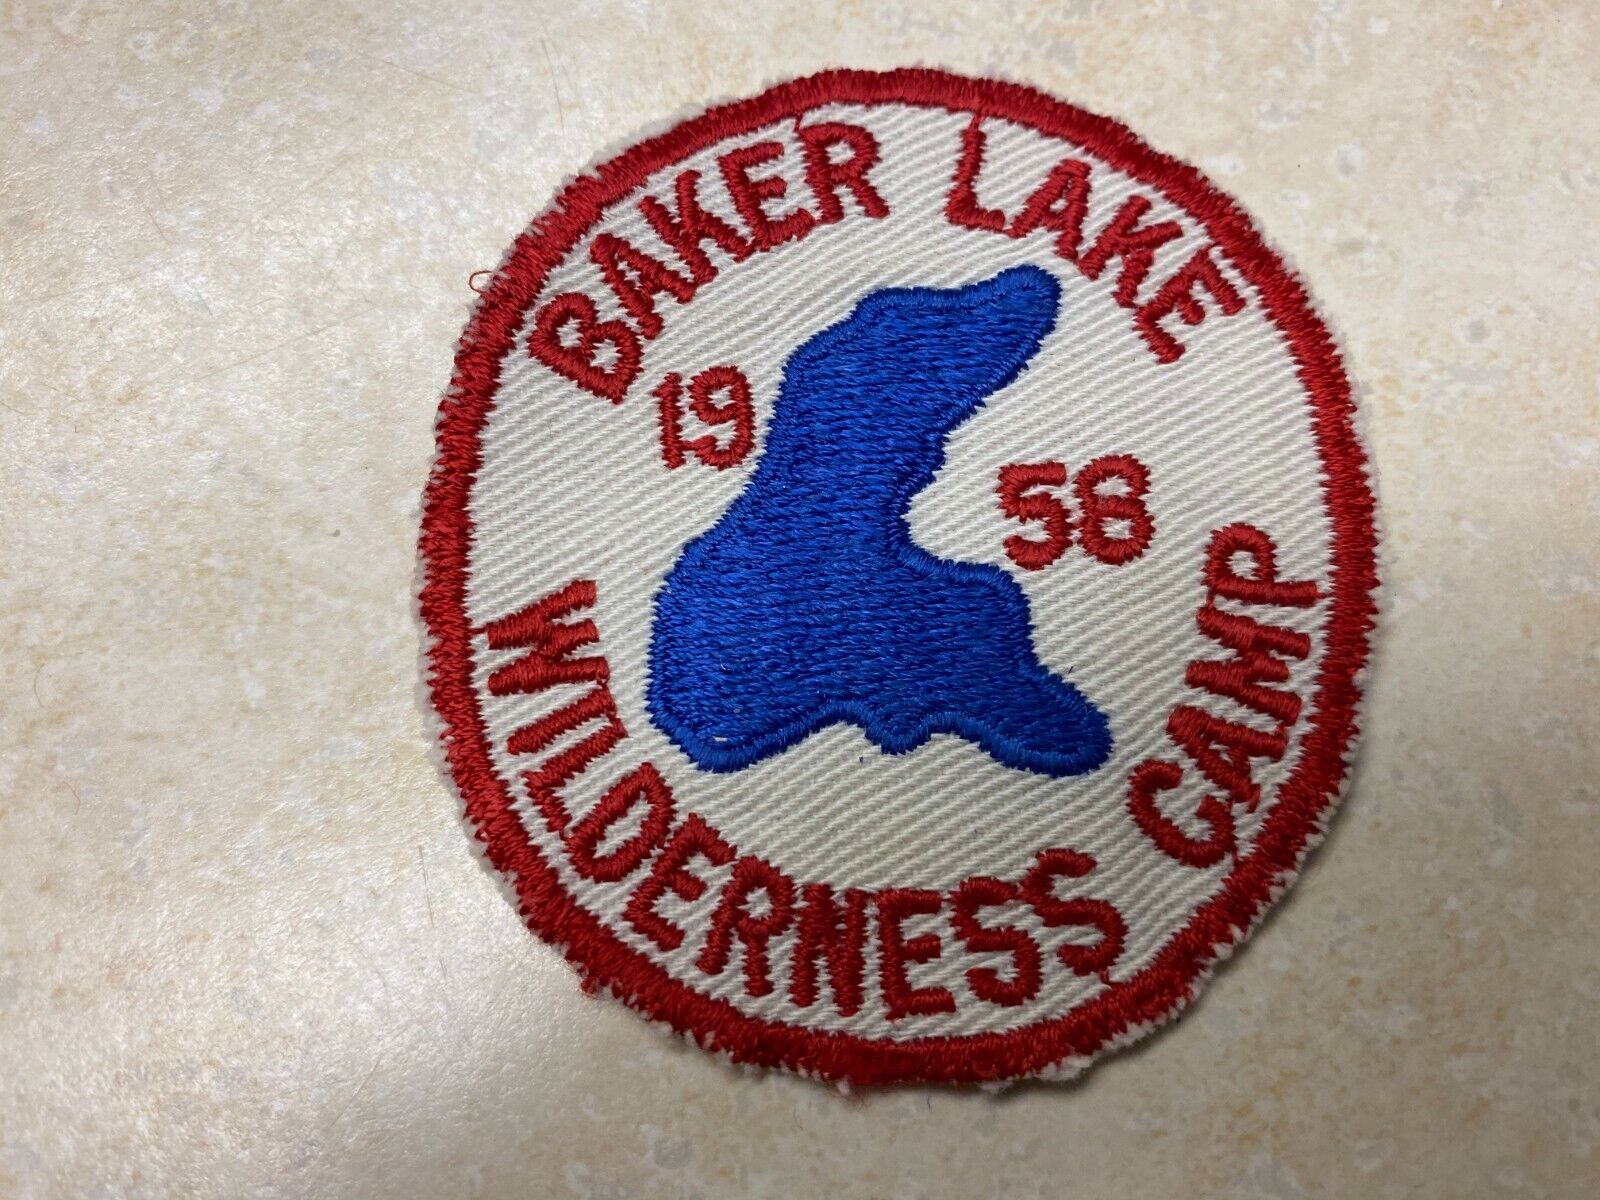 1958 Baker Lake Wilderness Camp Camp Patch